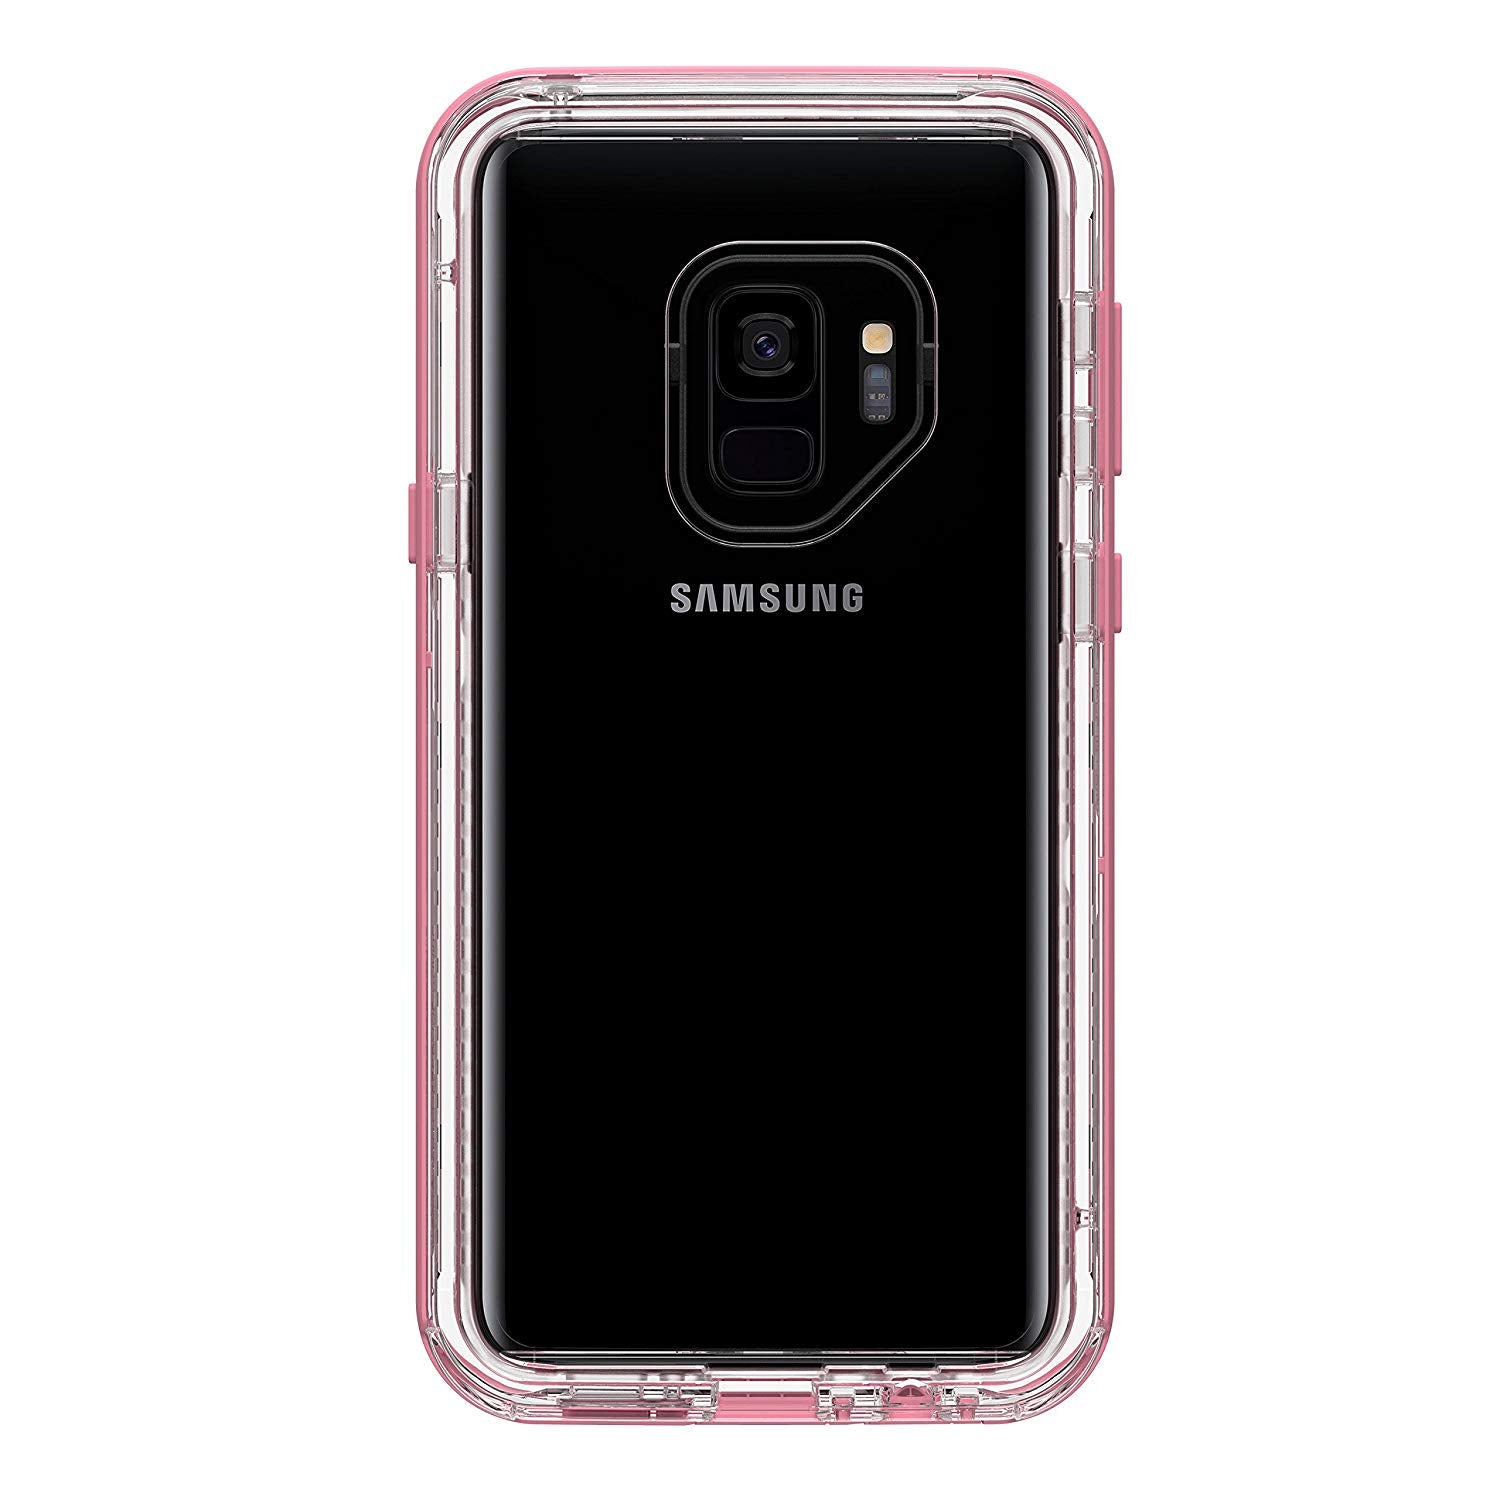 LifeProof NEXT SERIES Case for Galaxy S9 Plus (ONLY) - Cactus Rose (Certified Refurbished)